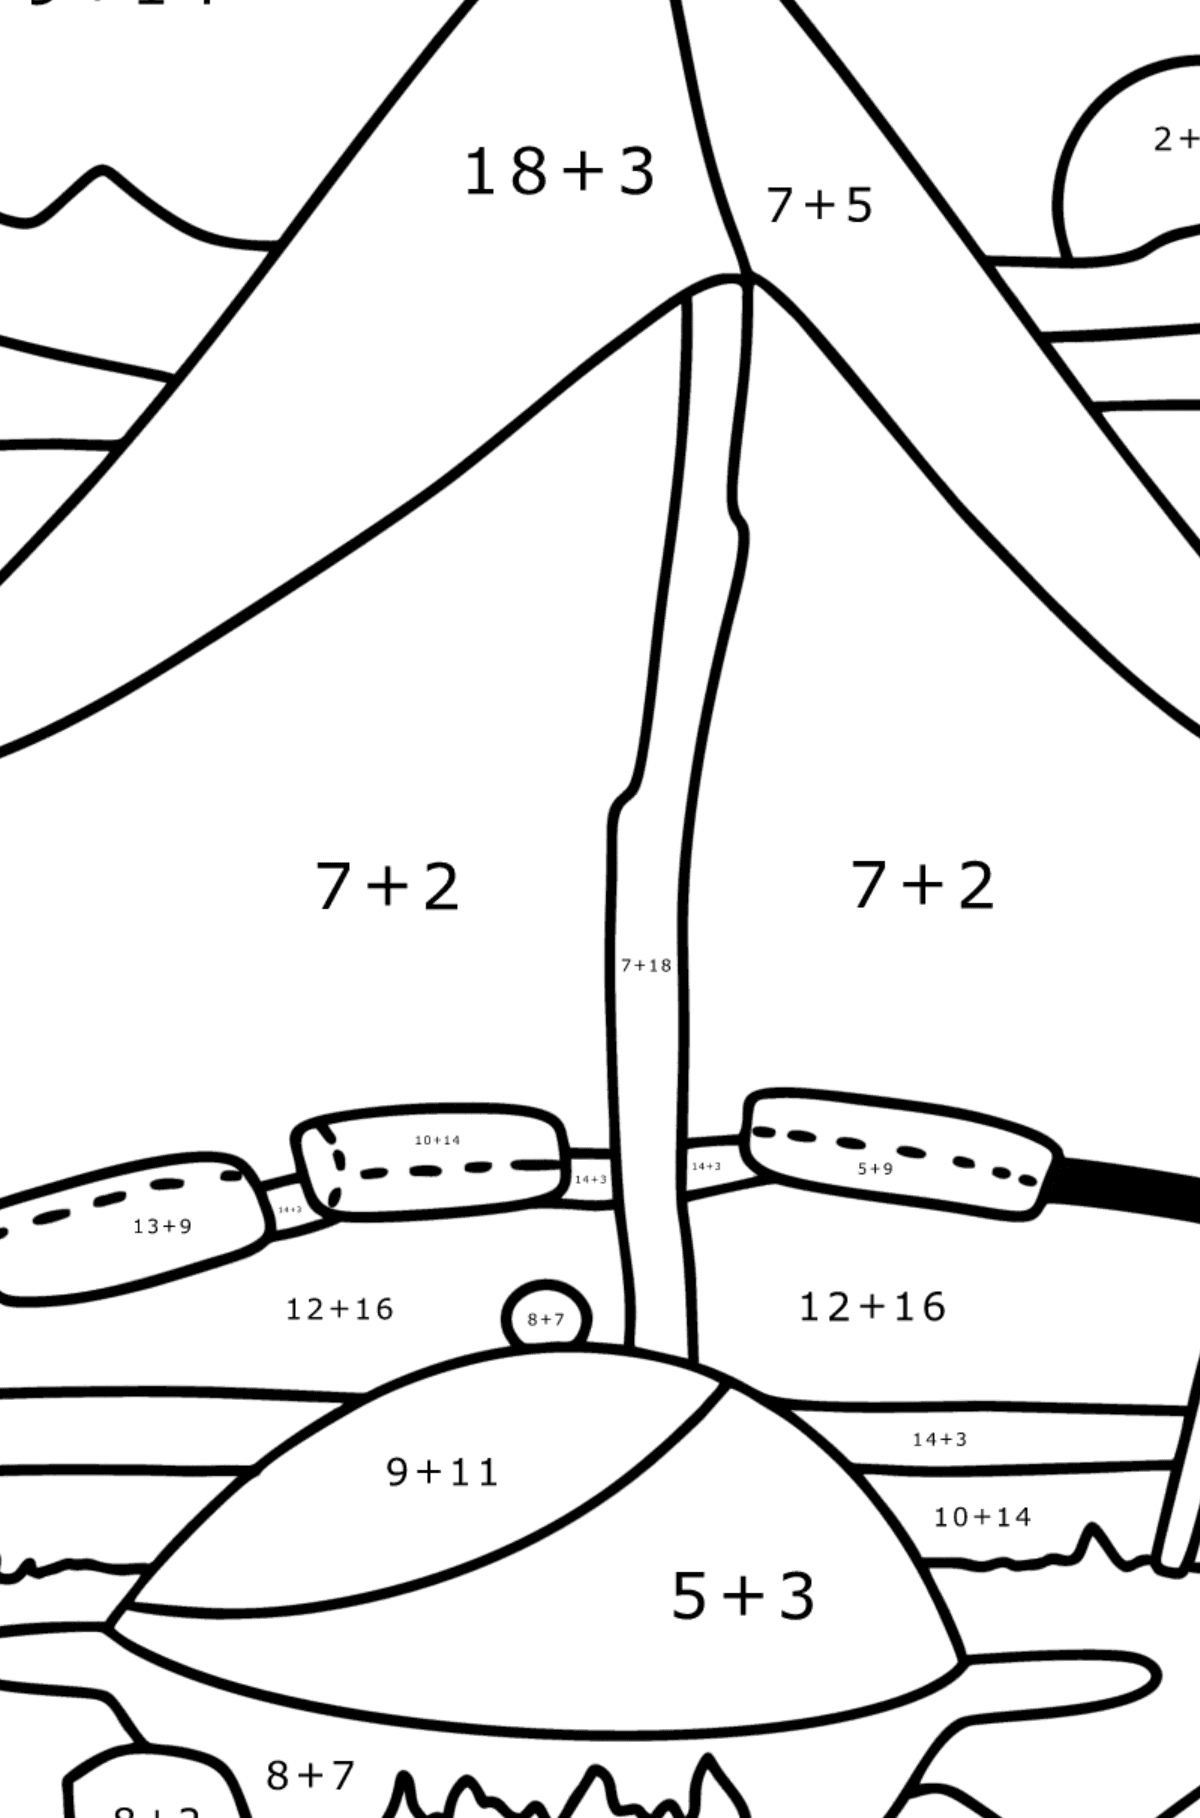 Bedouin tent coloring page - Math Coloring - Addition for Kids